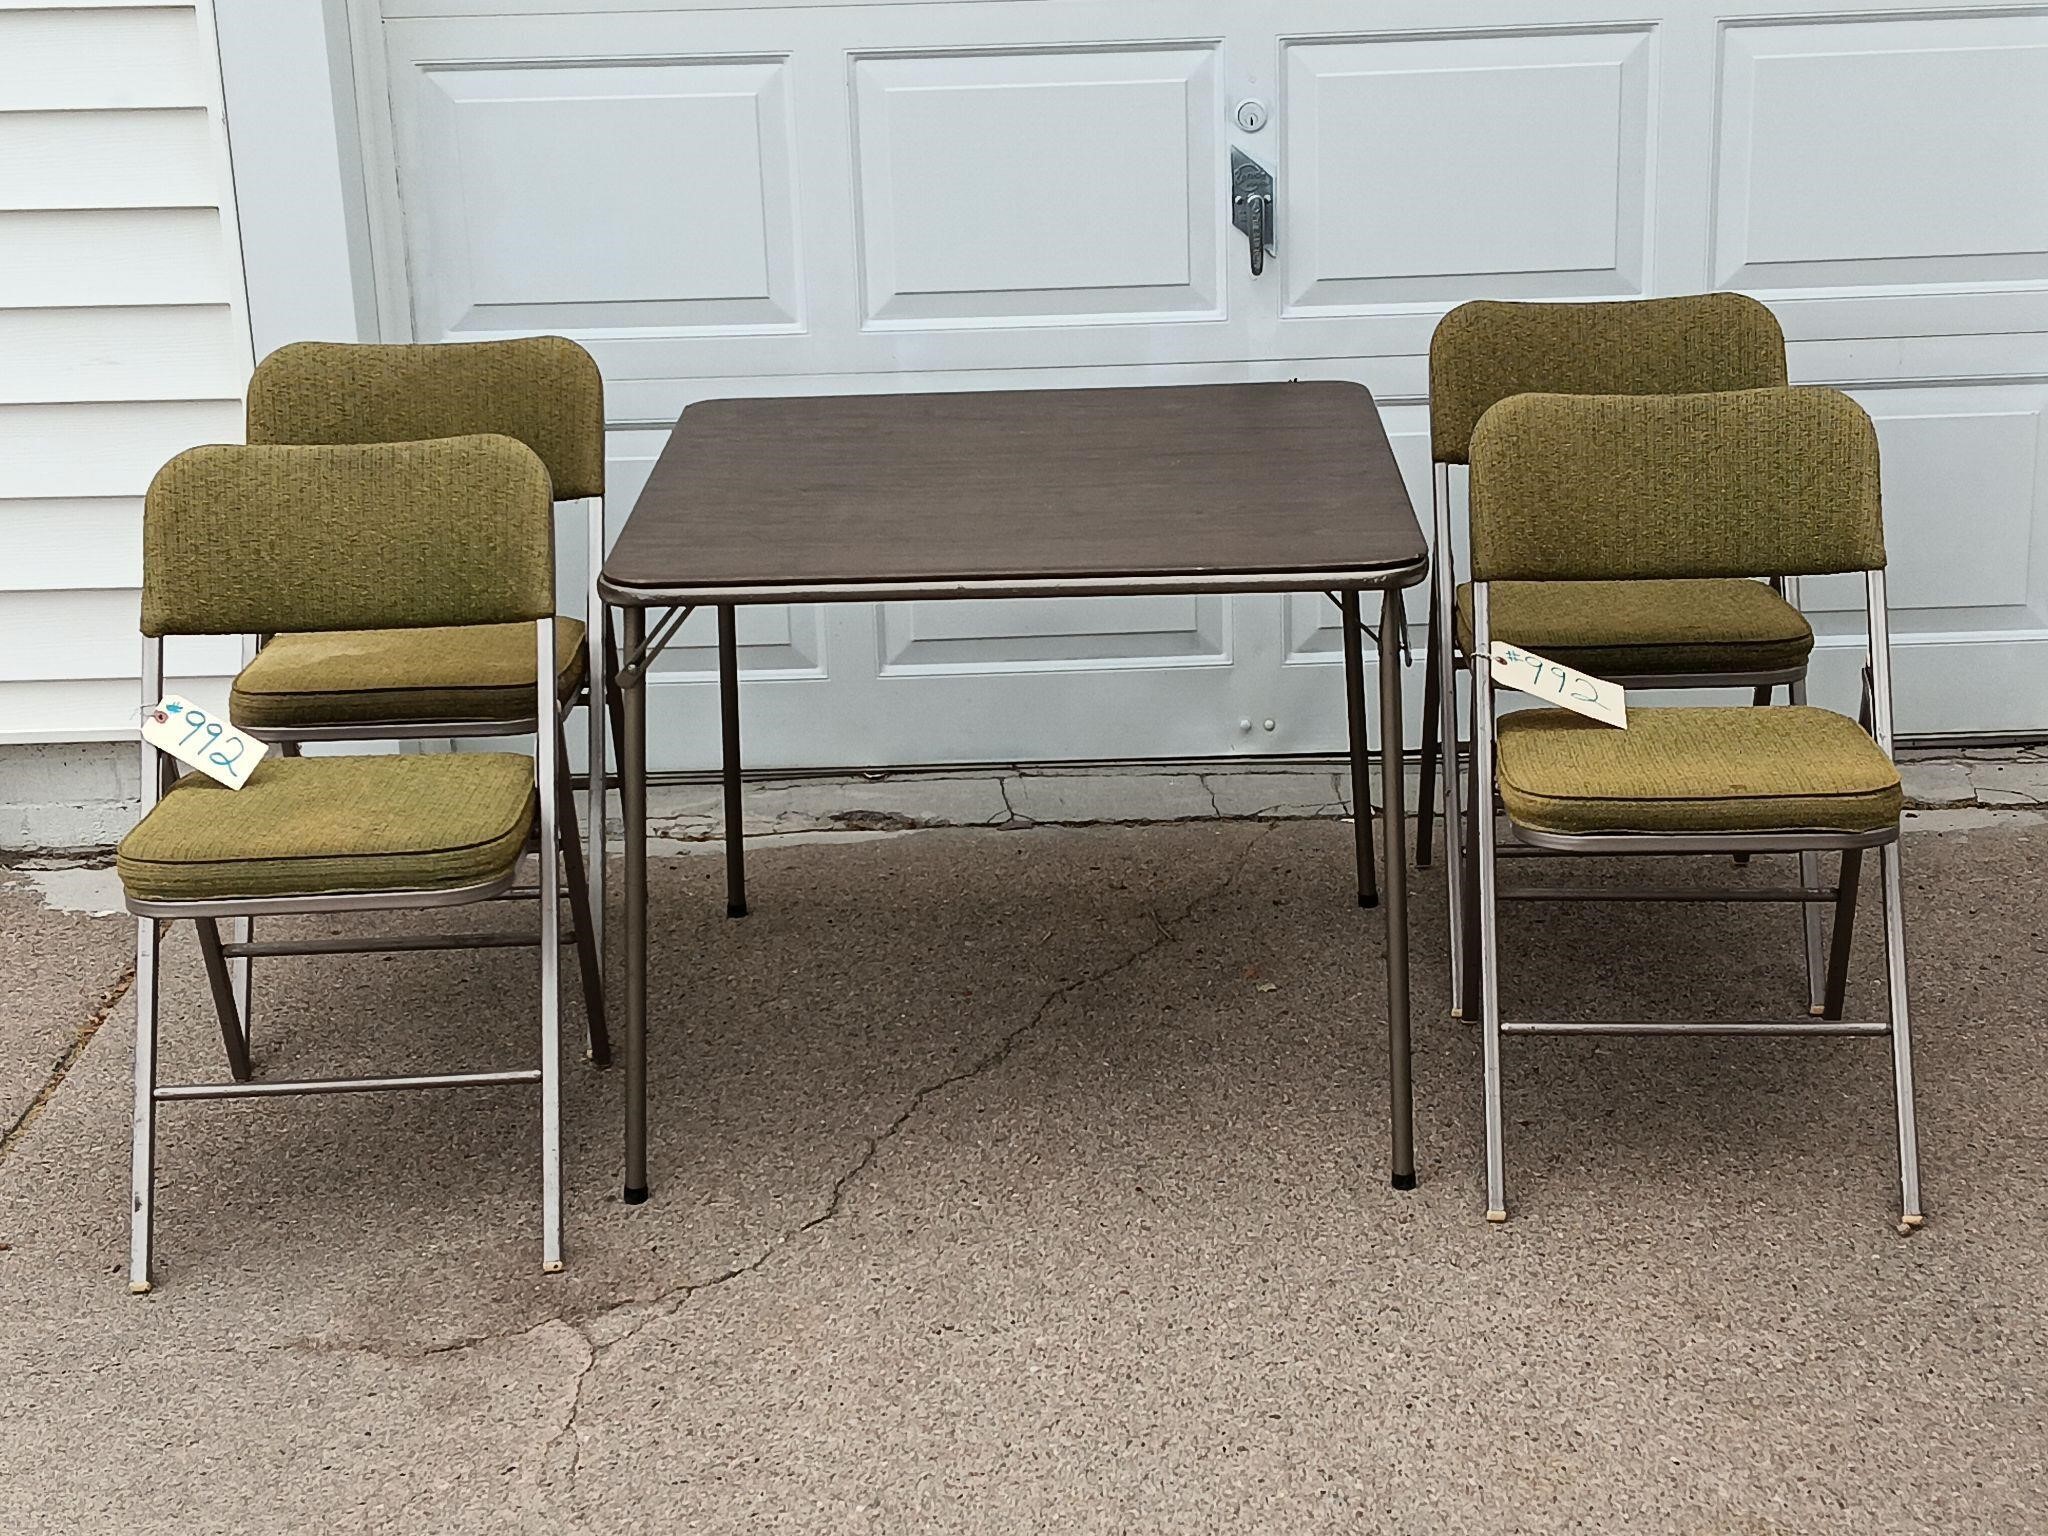 Samsonite Card Table With 4 Chairs.